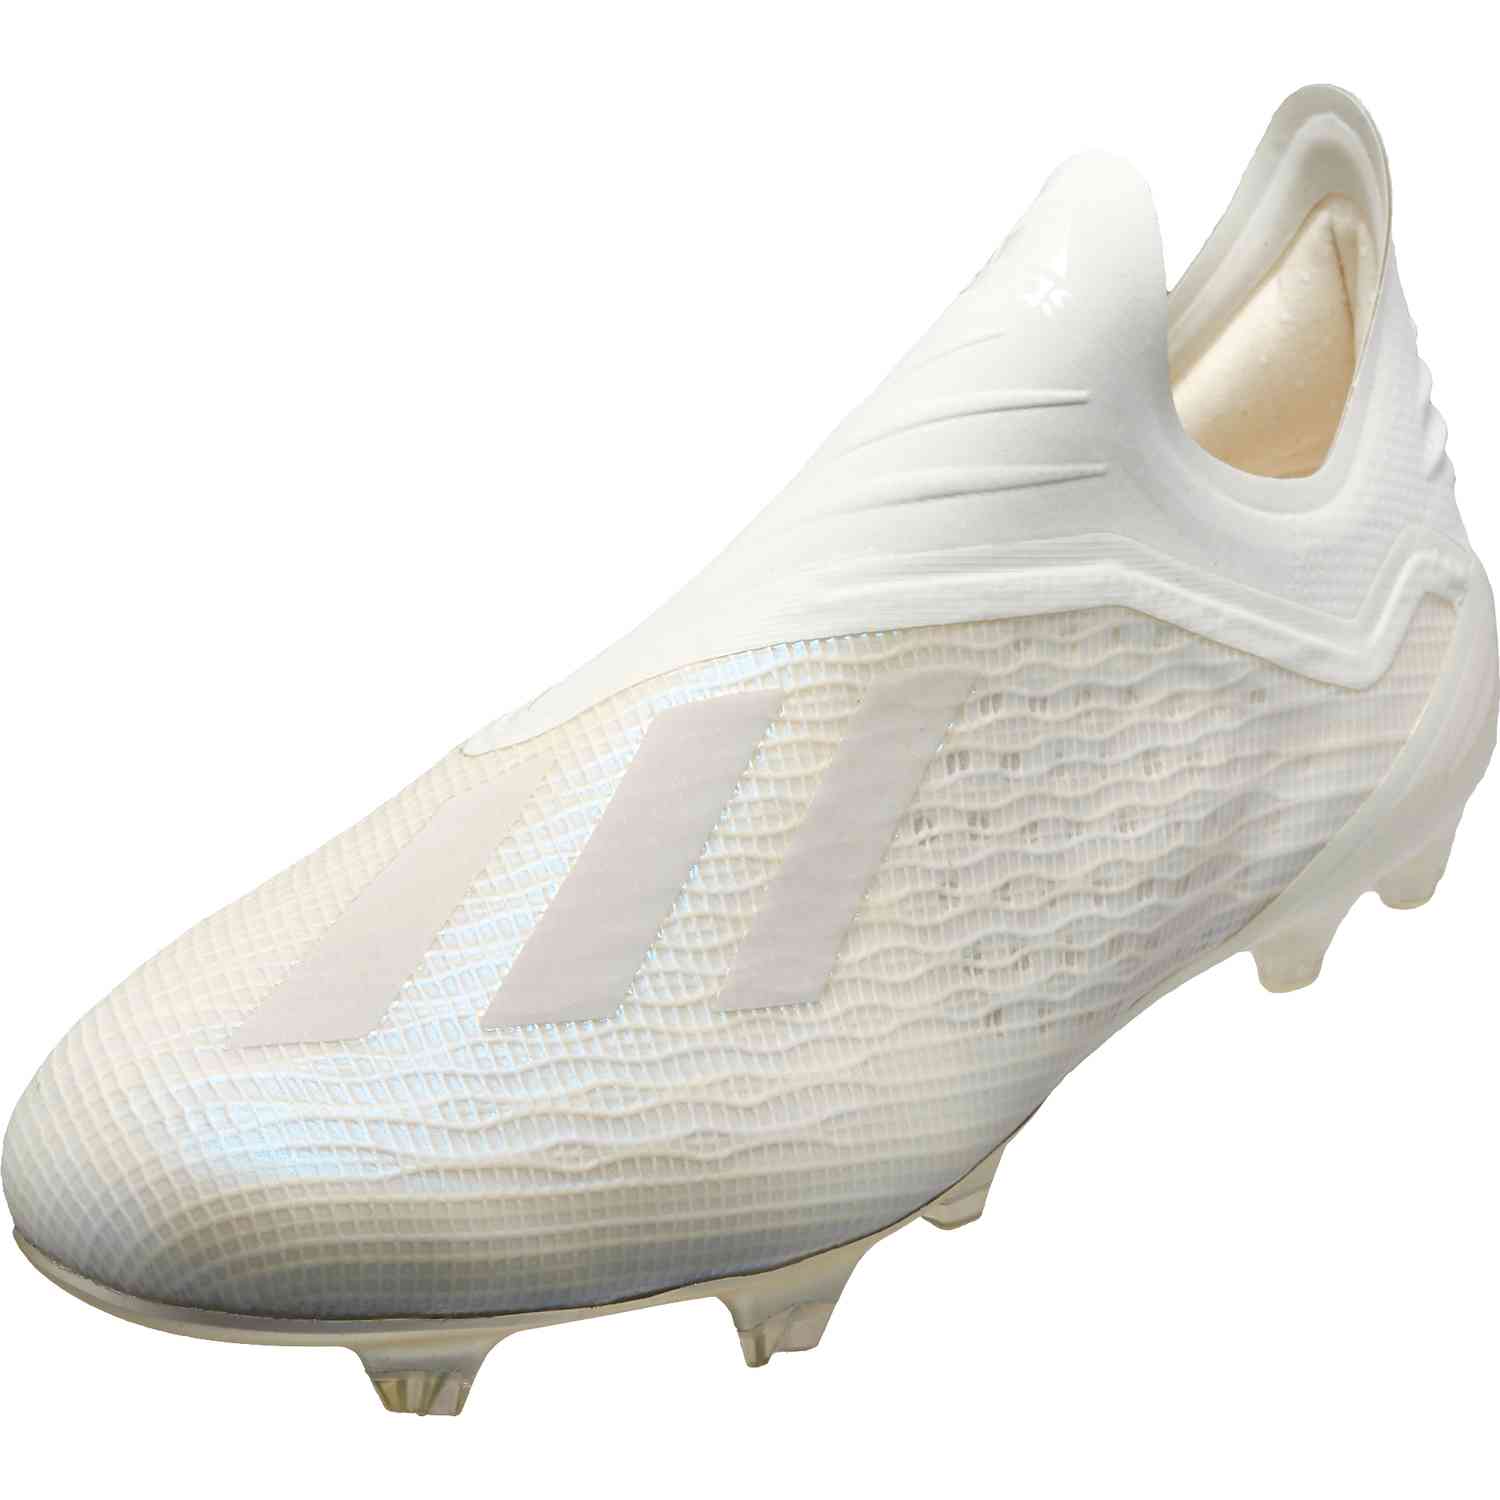 white adidas x soccer cleats